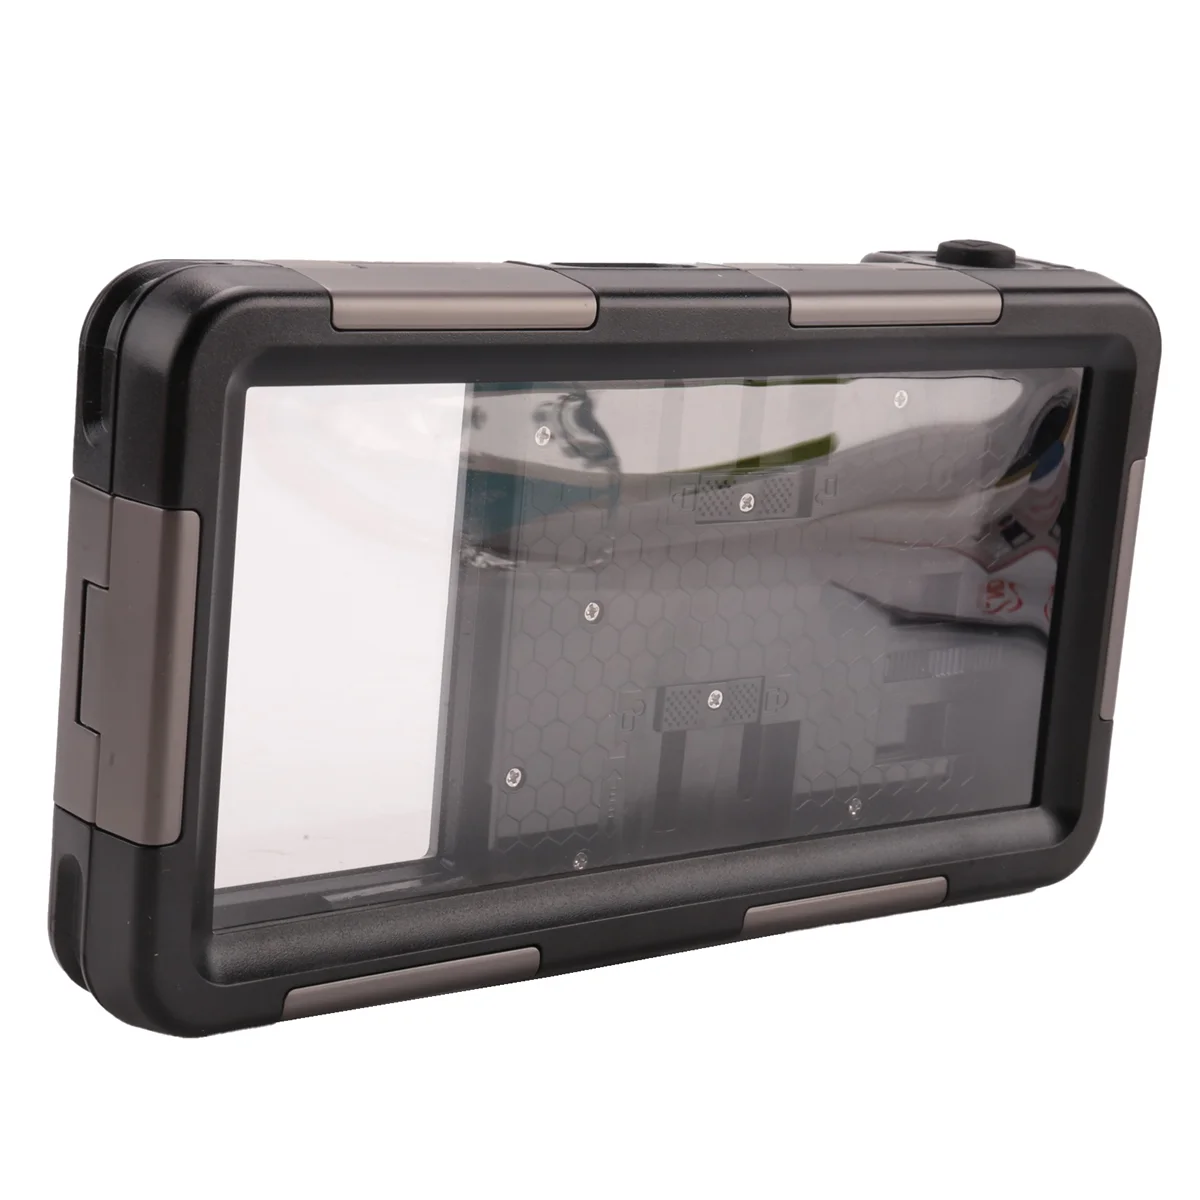 

Submersible Waterproof Case for iPhone 13/12/11 Pro Max Waterproof Case, Underwater Case for Snorkeling Kayak Floating